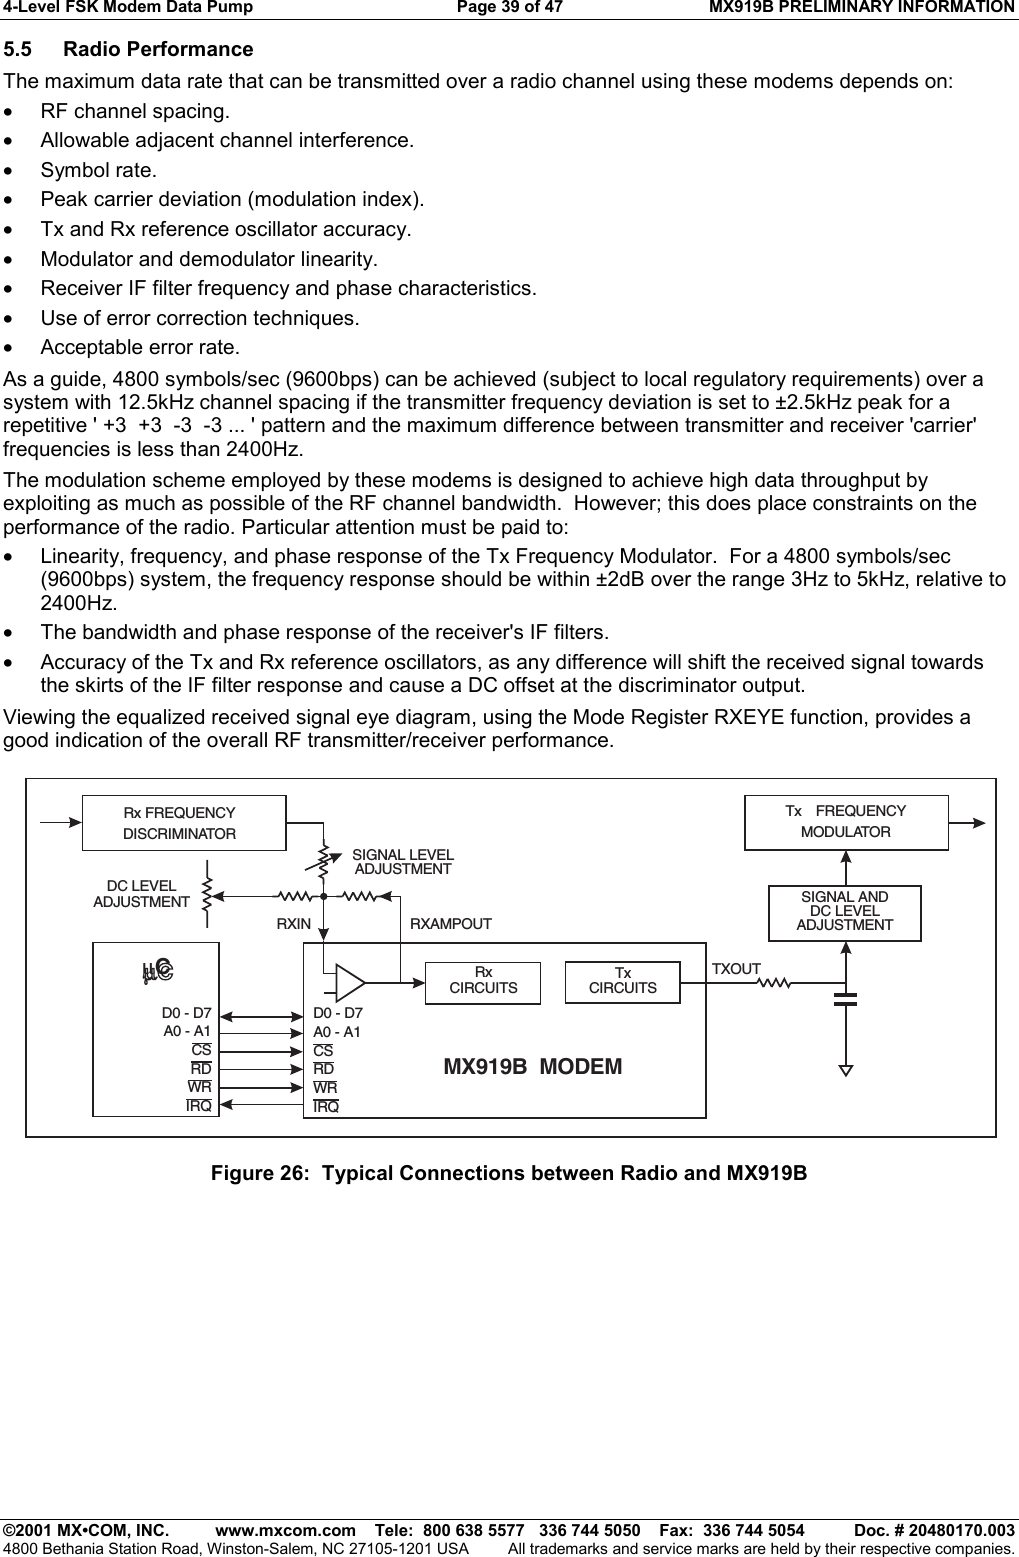 4-Level FSK Modem Data Pump  Page 39 of 47  MX919B PRELIMINARY INFORMATION   ©2001 MX•COM, INC.  www.mxcom.com    Tele:  800 638 5577   336 744 5050    Fax:  336 744 5054  Doc. # 20480170.003 4800 Bethania Station Road, Winston-Salem, NC 27105-1201 USA  All trademarks and service marks are held by their respective companies. 5.5 Radio Performance The maximum data rate that can be transmitted over a radio channel using these modems depends on: •  RF channel spacing. •  Allowable adjacent channel interference. •  Symbol rate. •  Peak carrier deviation (modulation index). •  Tx and Rx reference oscillator accuracy. •  Modulator and demodulator linearity. •  Receiver IF filter frequency and phase characteristics. •  Use of error correction techniques. •  Acceptable error rate. As a guide, 4800 symbols/sec (9600bps) can be achieved (subject to local regulatory requirements) over a system with 12.5kHz channel spacing if the transmitter frequency deviation is set to ±2.5kHz peak for a repetitive &apos; +3  +3  -3  -3 ... &apos; pattern and the maximum difference between transmitter and receiver &apos;carrier&apos; frequencies is less than 2400Hz. The modulation scheme employed by these modems is designed to achieve high data throughput by exploiting as much as possible of the RF channel bandwidth.  However; this does place constraints on the performance of the radio. Particular attention must be paid to: •  Linearity, frequency, and phase response of the Tx Frequency Modulator.  For a 4800 symbols/sec (9600bps) system, the frequency response should be within ±2dB over the range 3Hz to 5kHz, relative to 2400Hz. •  The bandwidth and phase response of the receiver&apos;s IF filters. •  Accuracy of the Tx and Rx reference oscillators, as any difference will shift the received signal towards the skirts of the IF filter response and cause a DC offset at the discriminator output. Viewing the equalized received signal eye diagram, using the Mode Register RXEYE function, provides a good indication of the overall RF transmitter/receiver performance. RxCIRCUITSTxCIRCUITSD0 - D7A0 - A1CSRDWRIRQD0 - D7A0 - A1CSRDWRIRQTXOUTSIGNAL ANDDC LEVELADJUSTMENTSIGNAL LEVELADJUSTMENTRXIN RXAMPOUTRx FREQUENCYDISCRIMINATORTx FREQUENCYMODULATORDC LEVELADJUSTMENTMX919B  MODEMµCµC Figure 26:  Typical Connections between Radio and MX919B 